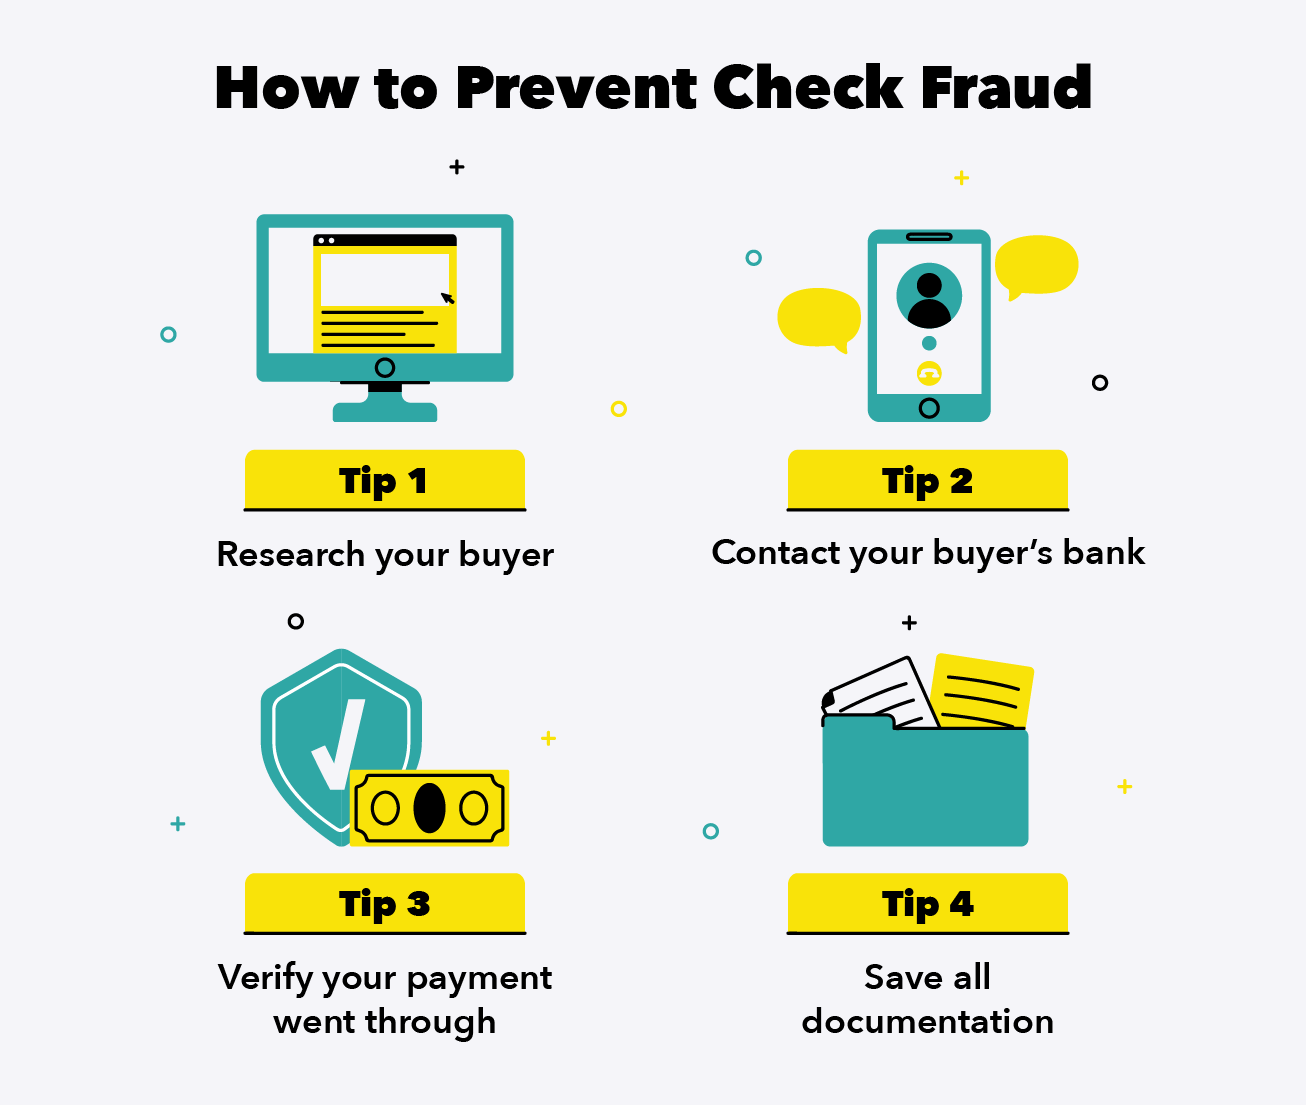 Illustrations depict the 4 ways to prevent check fraud. 